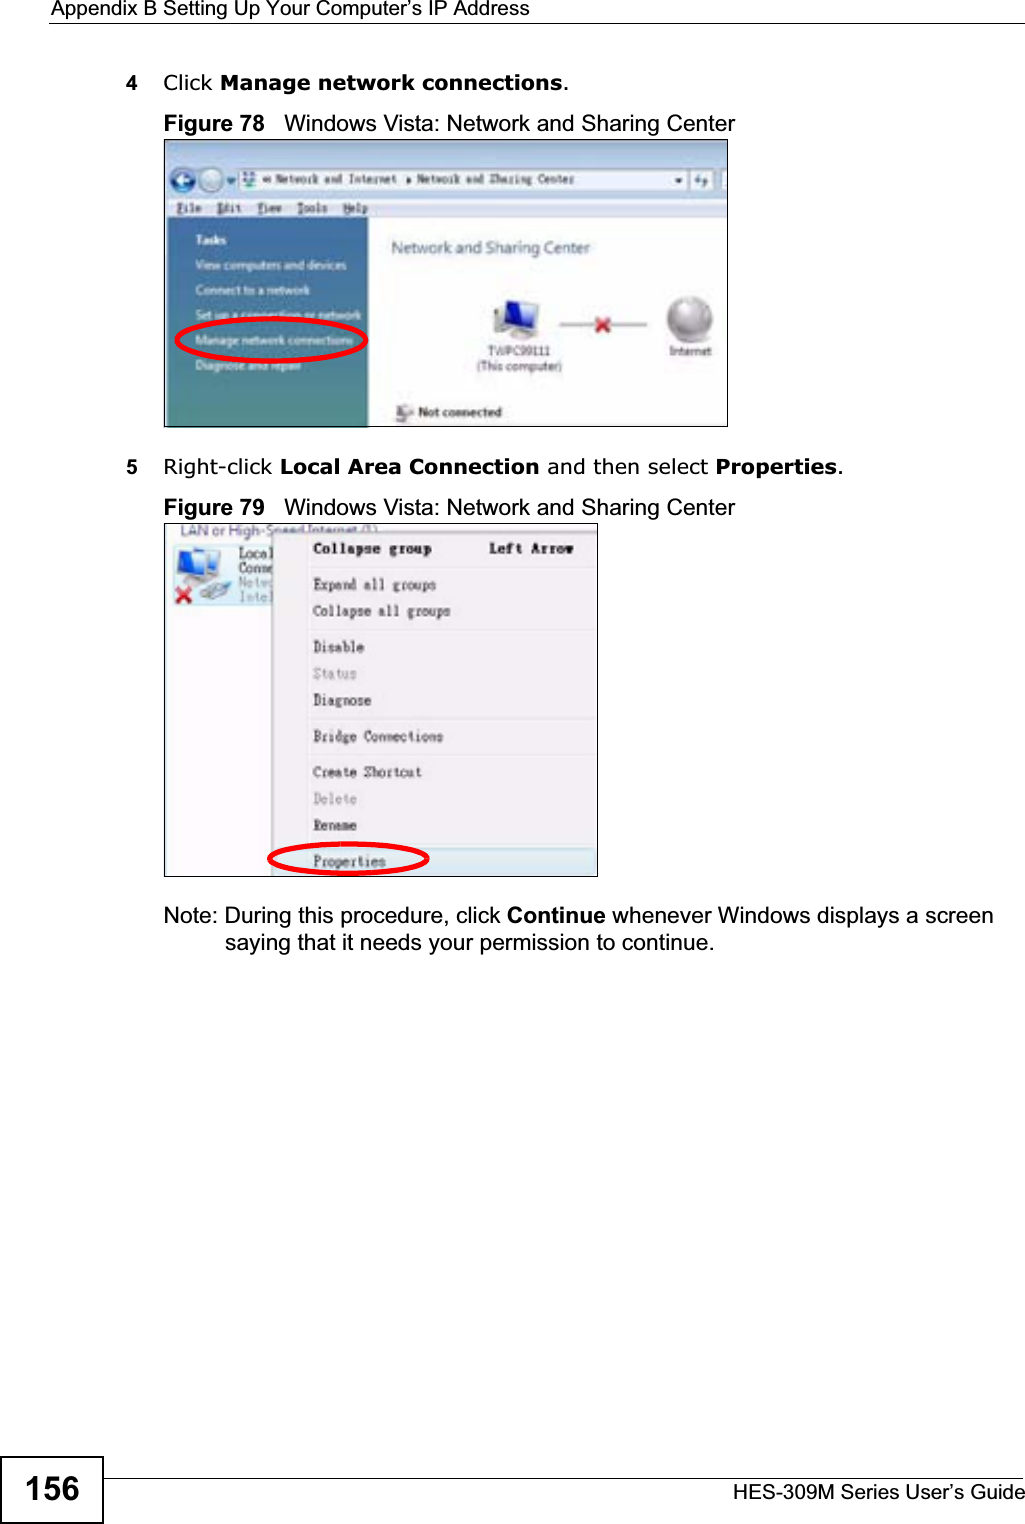 Appendix B Setting Up Your Computer’s IP AddressHES-309M Series User’s Guide1564Click Manage network connections.Figure 78   Windows Vista: Network and Sharing Center5Right-click Local Area Connection and then select Properties.Figure 79   Windows Vista: Network and Sharing CenterNote: During this procedure, click Continue whenever Windows displays a screen saying that it needs your permission to continue.